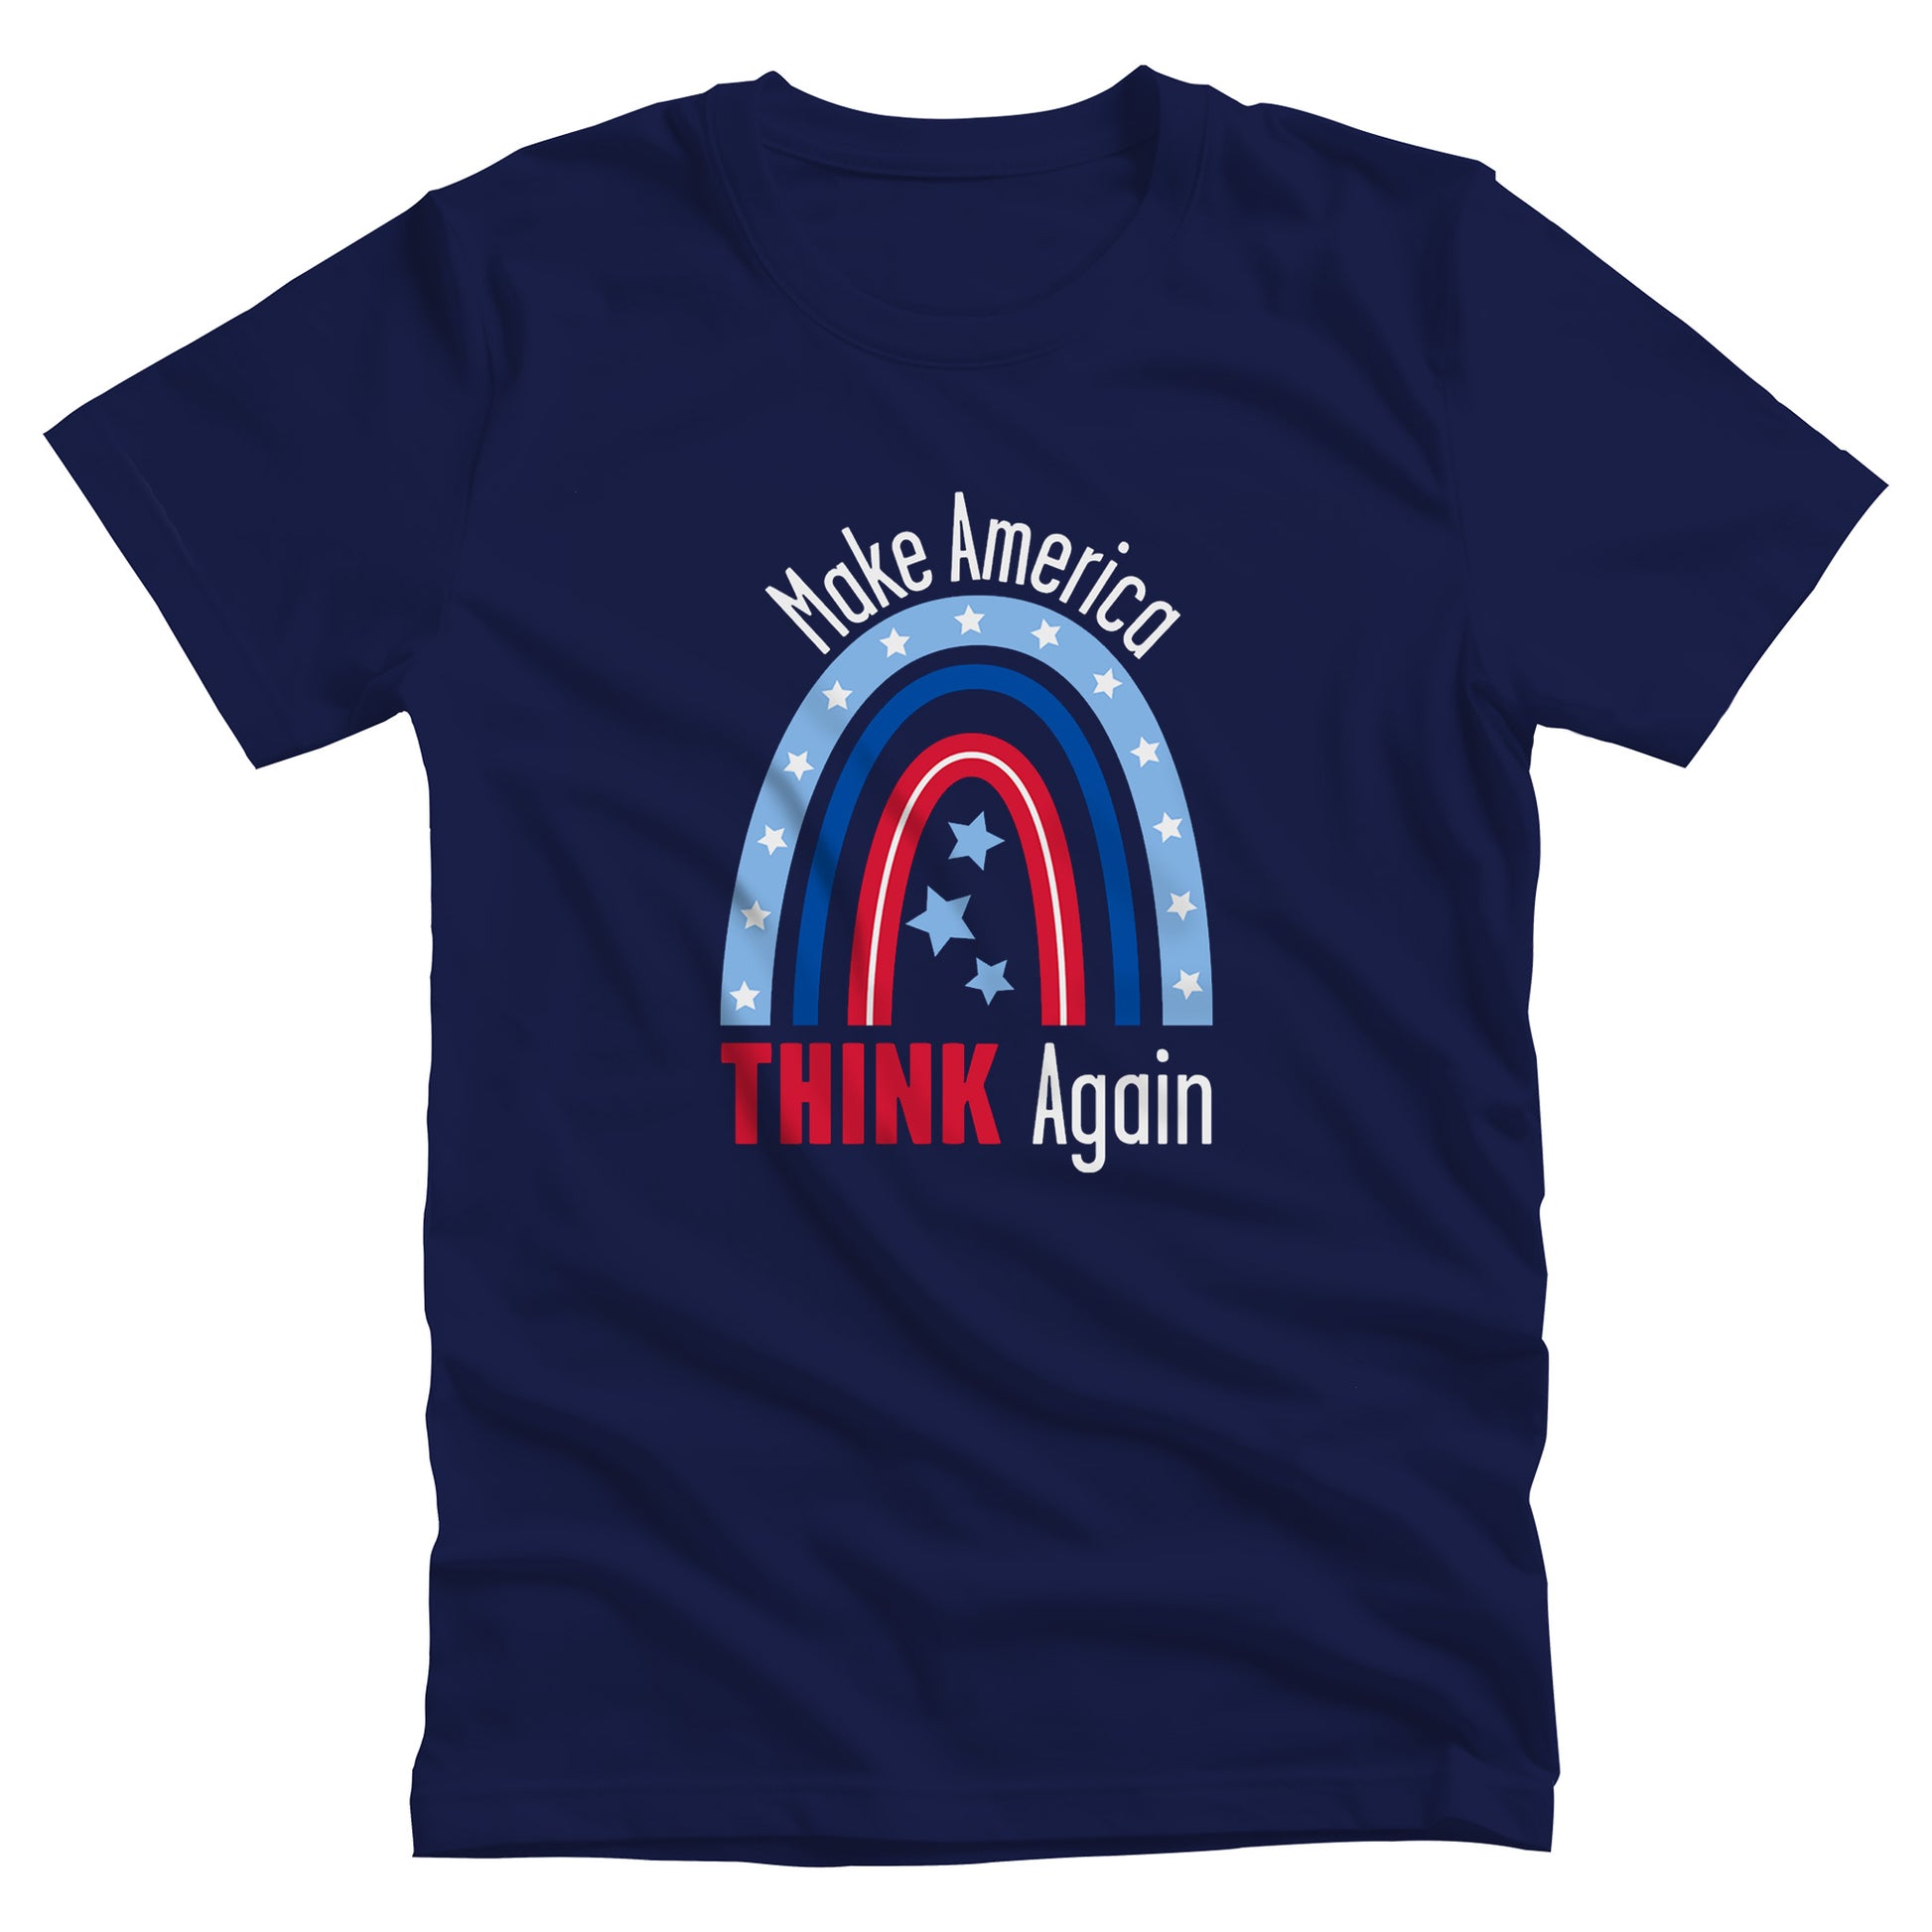 Navy Blue unisex t-shirt that says, “Make America THINK Again” with a graphic of a blue and red rainbow. “Make America” is red and arched over the rainbow. “THINK Again” is beneath the rainbow with “THINK” being blue and “Again” being red.